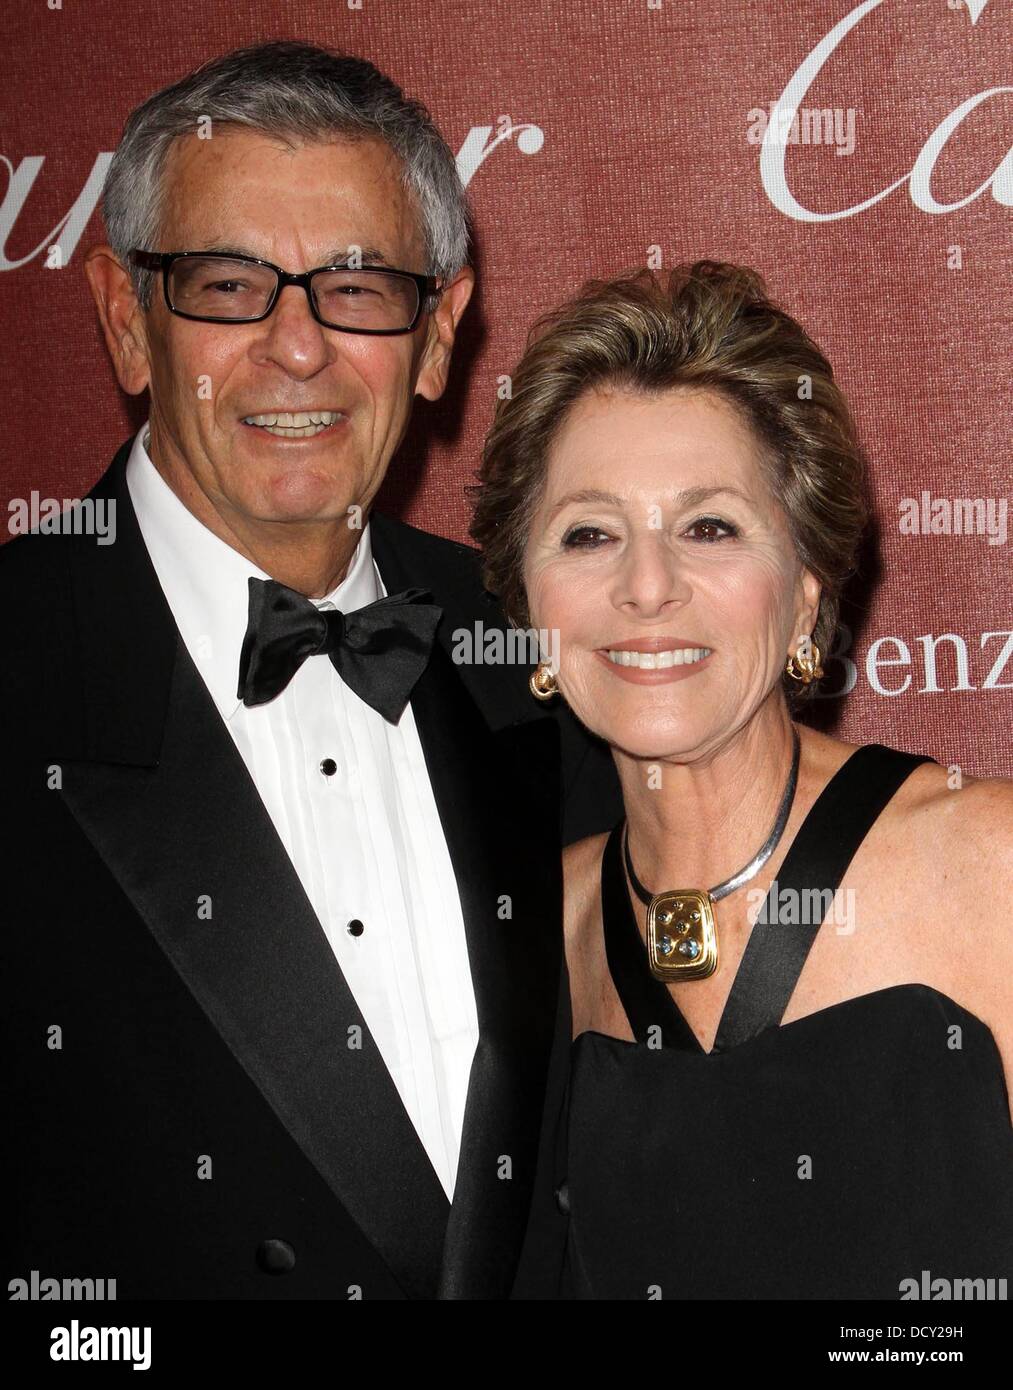 Stewart Boxer and Barbara Boxer The 23rd annual Palm Springs International Film Festival Awards Gala at The Palm Springs Convention Center - Arrivals Los Angeles, California - 07.01.12 Stock Photo